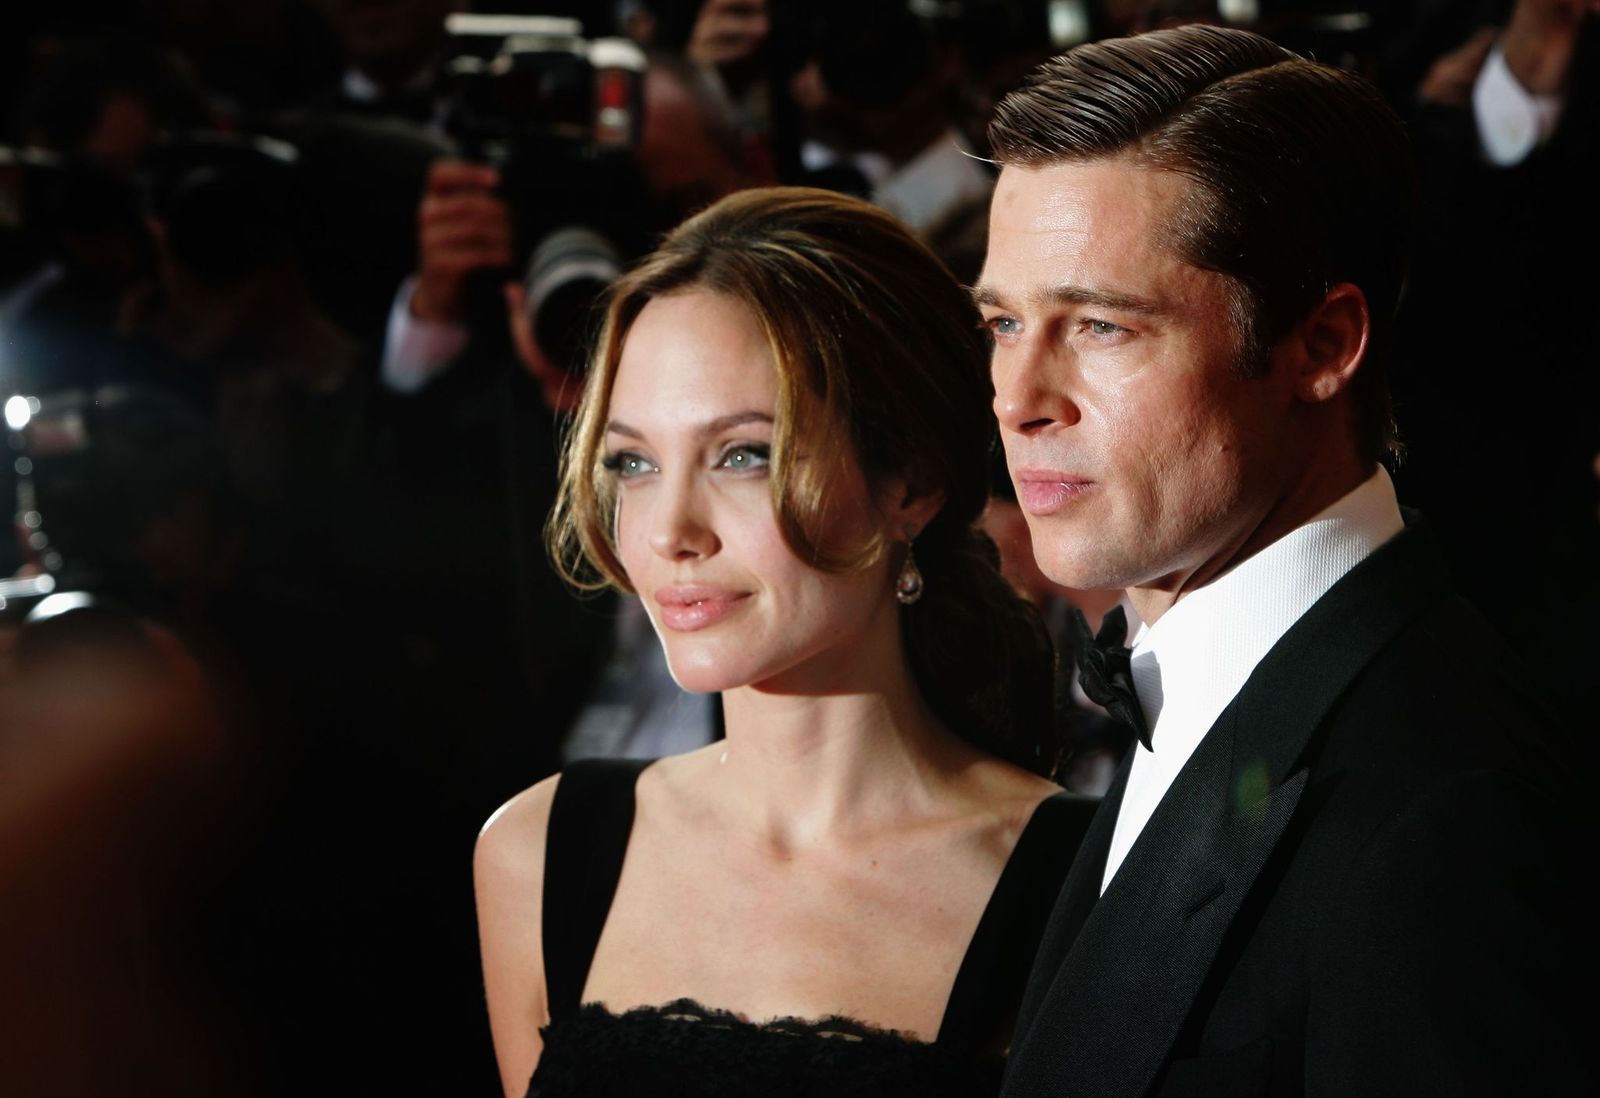 Angelina Jolie and Brad Pitt at the premiere for the film "A Mighty Heart" during the 60th International Cannes Film Festival on May 21, 2007, in France | Photo: Gareth Cattermole/Getty Images